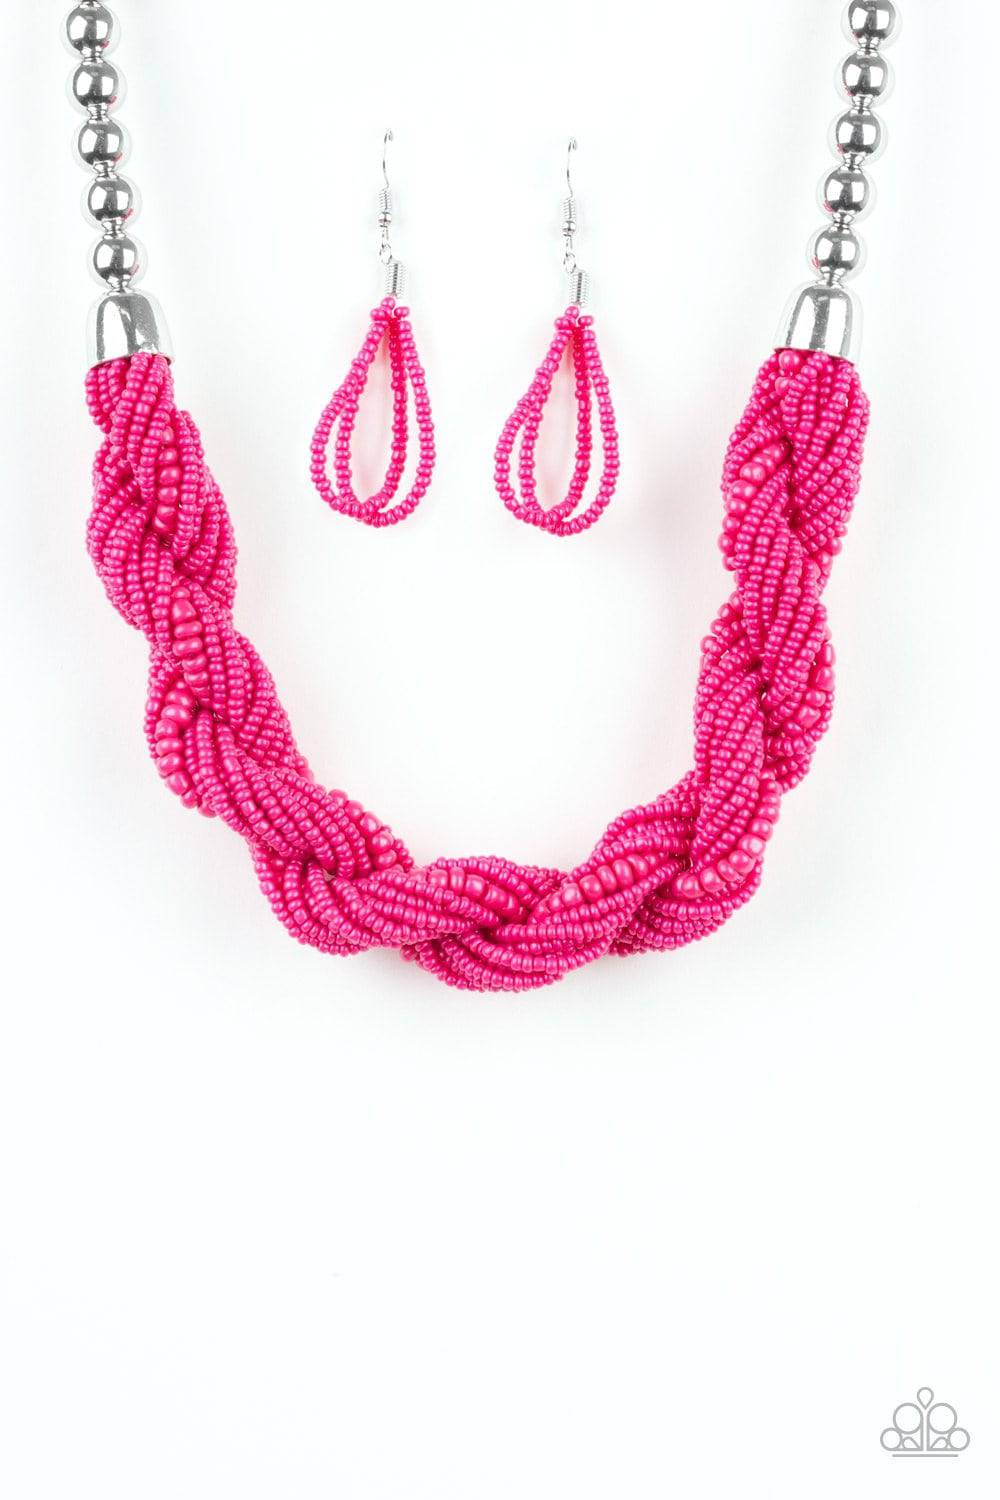 Savannah Surfin - Pink Seed Bead Necklace - Paparazzi Accessories - GlaMarous Titi Jewels